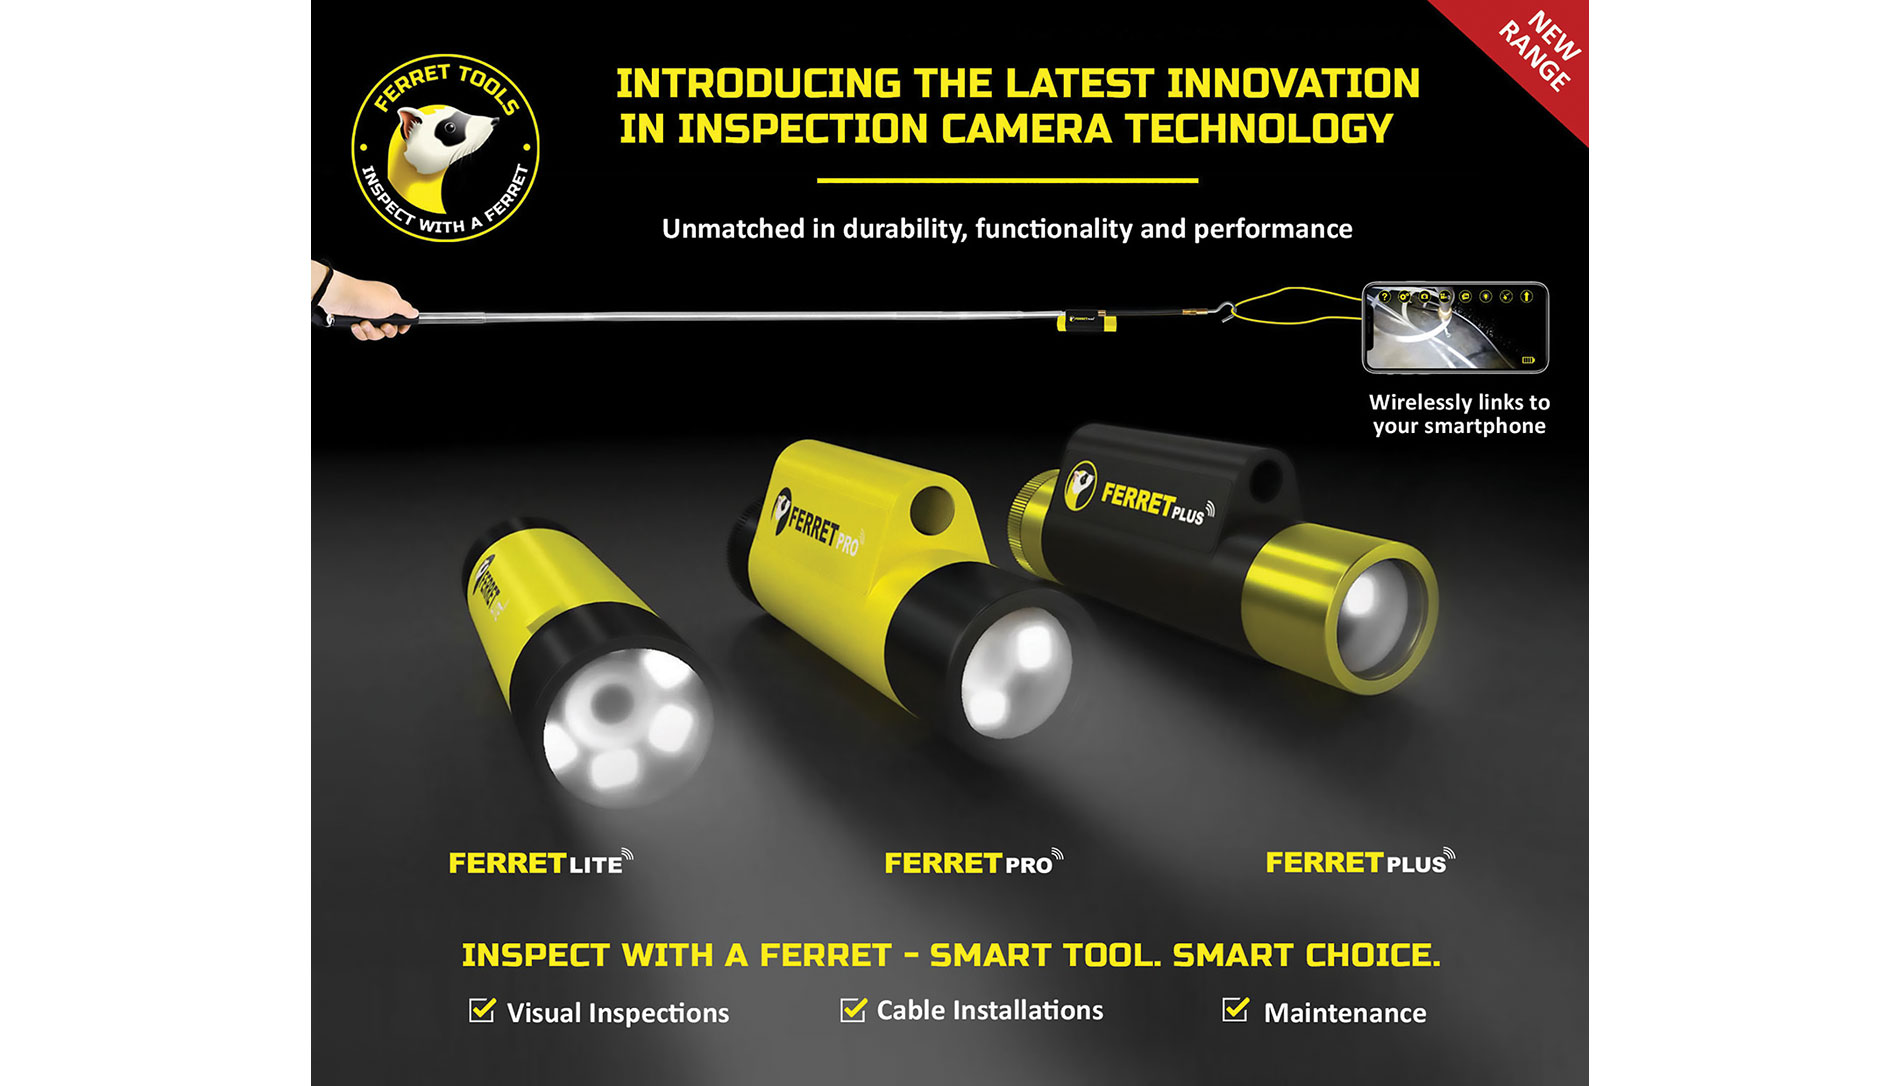 Ad with black background and black and yellow flashlight cameras and the Ferret Tools logo. Image by Ferret Tools.